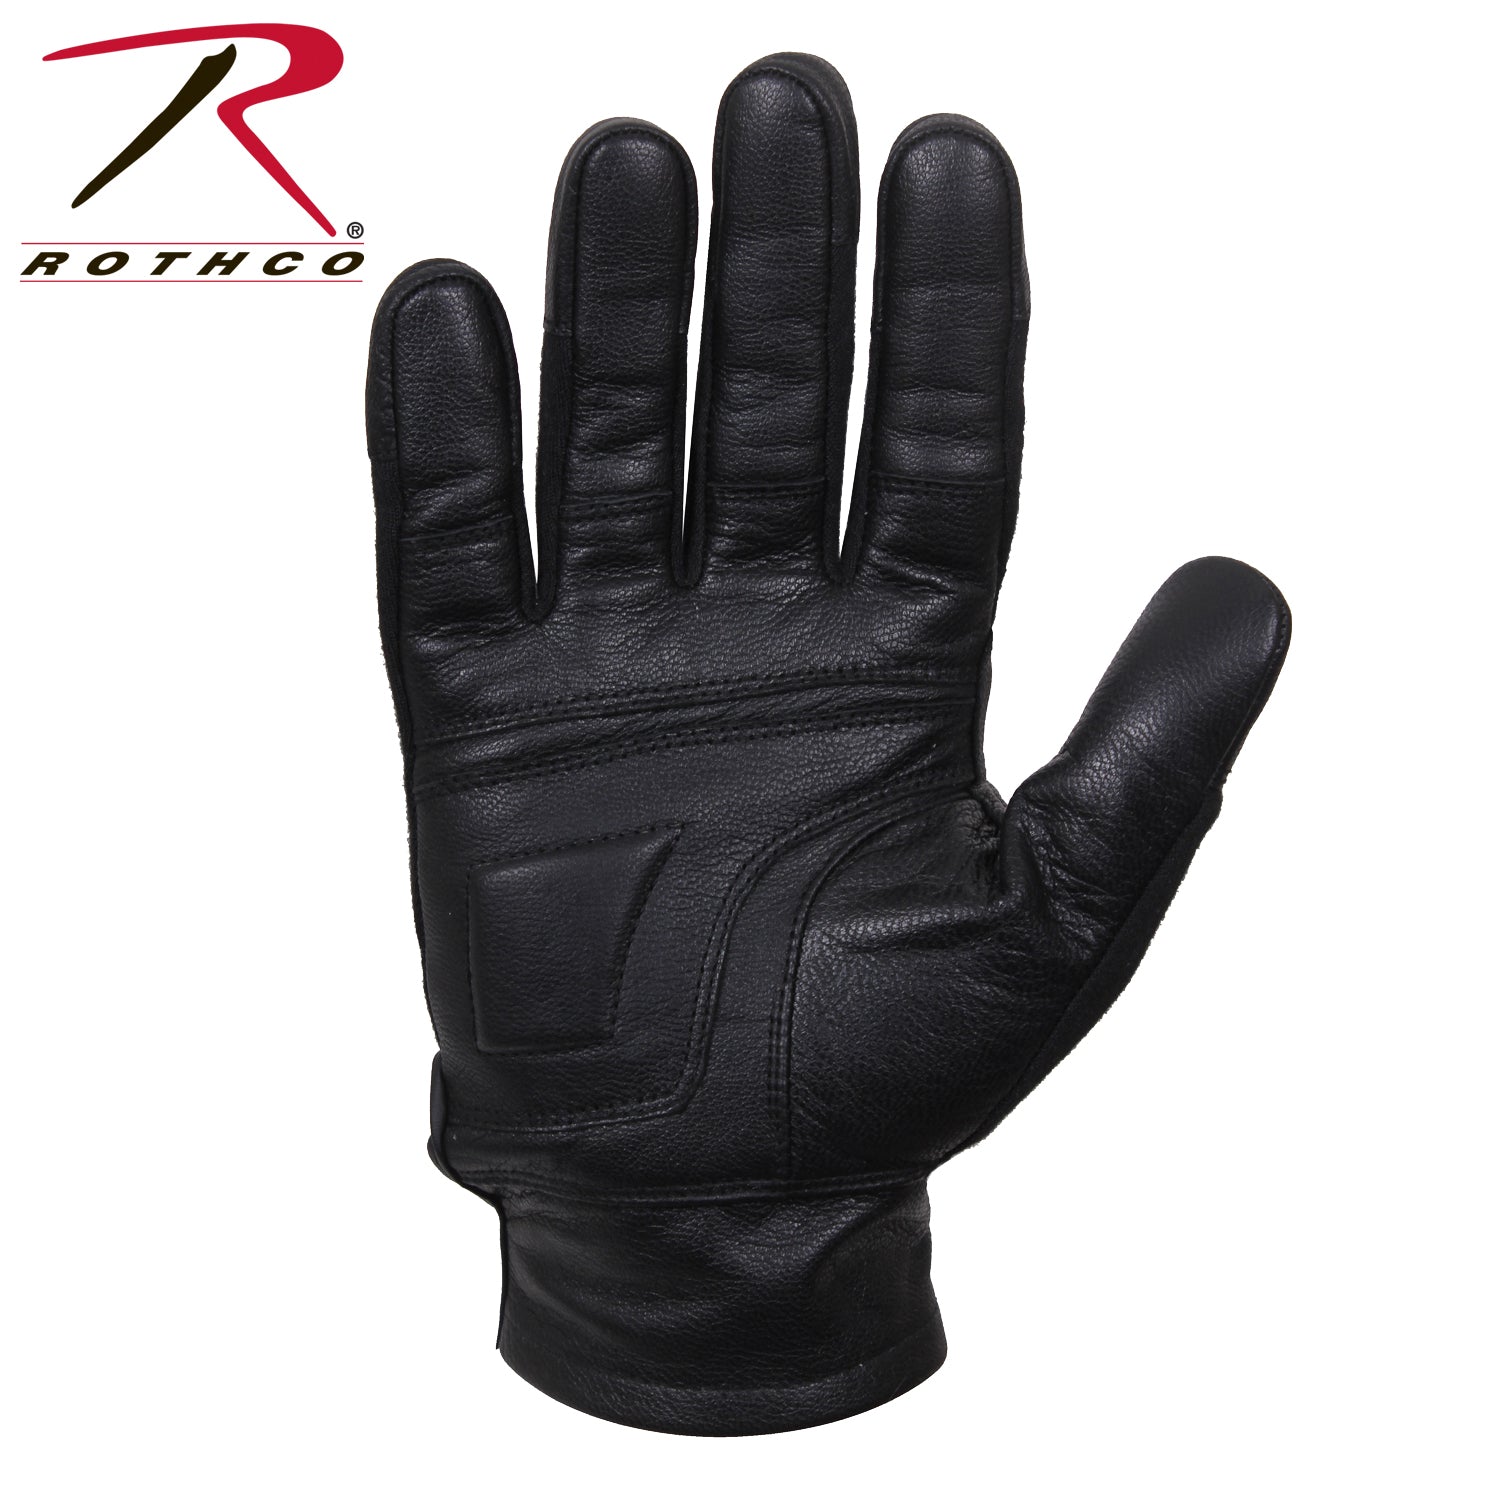 Rothco Hard Knuckle Cut and Fire Resistant Gloves - Tactical Choice Plus